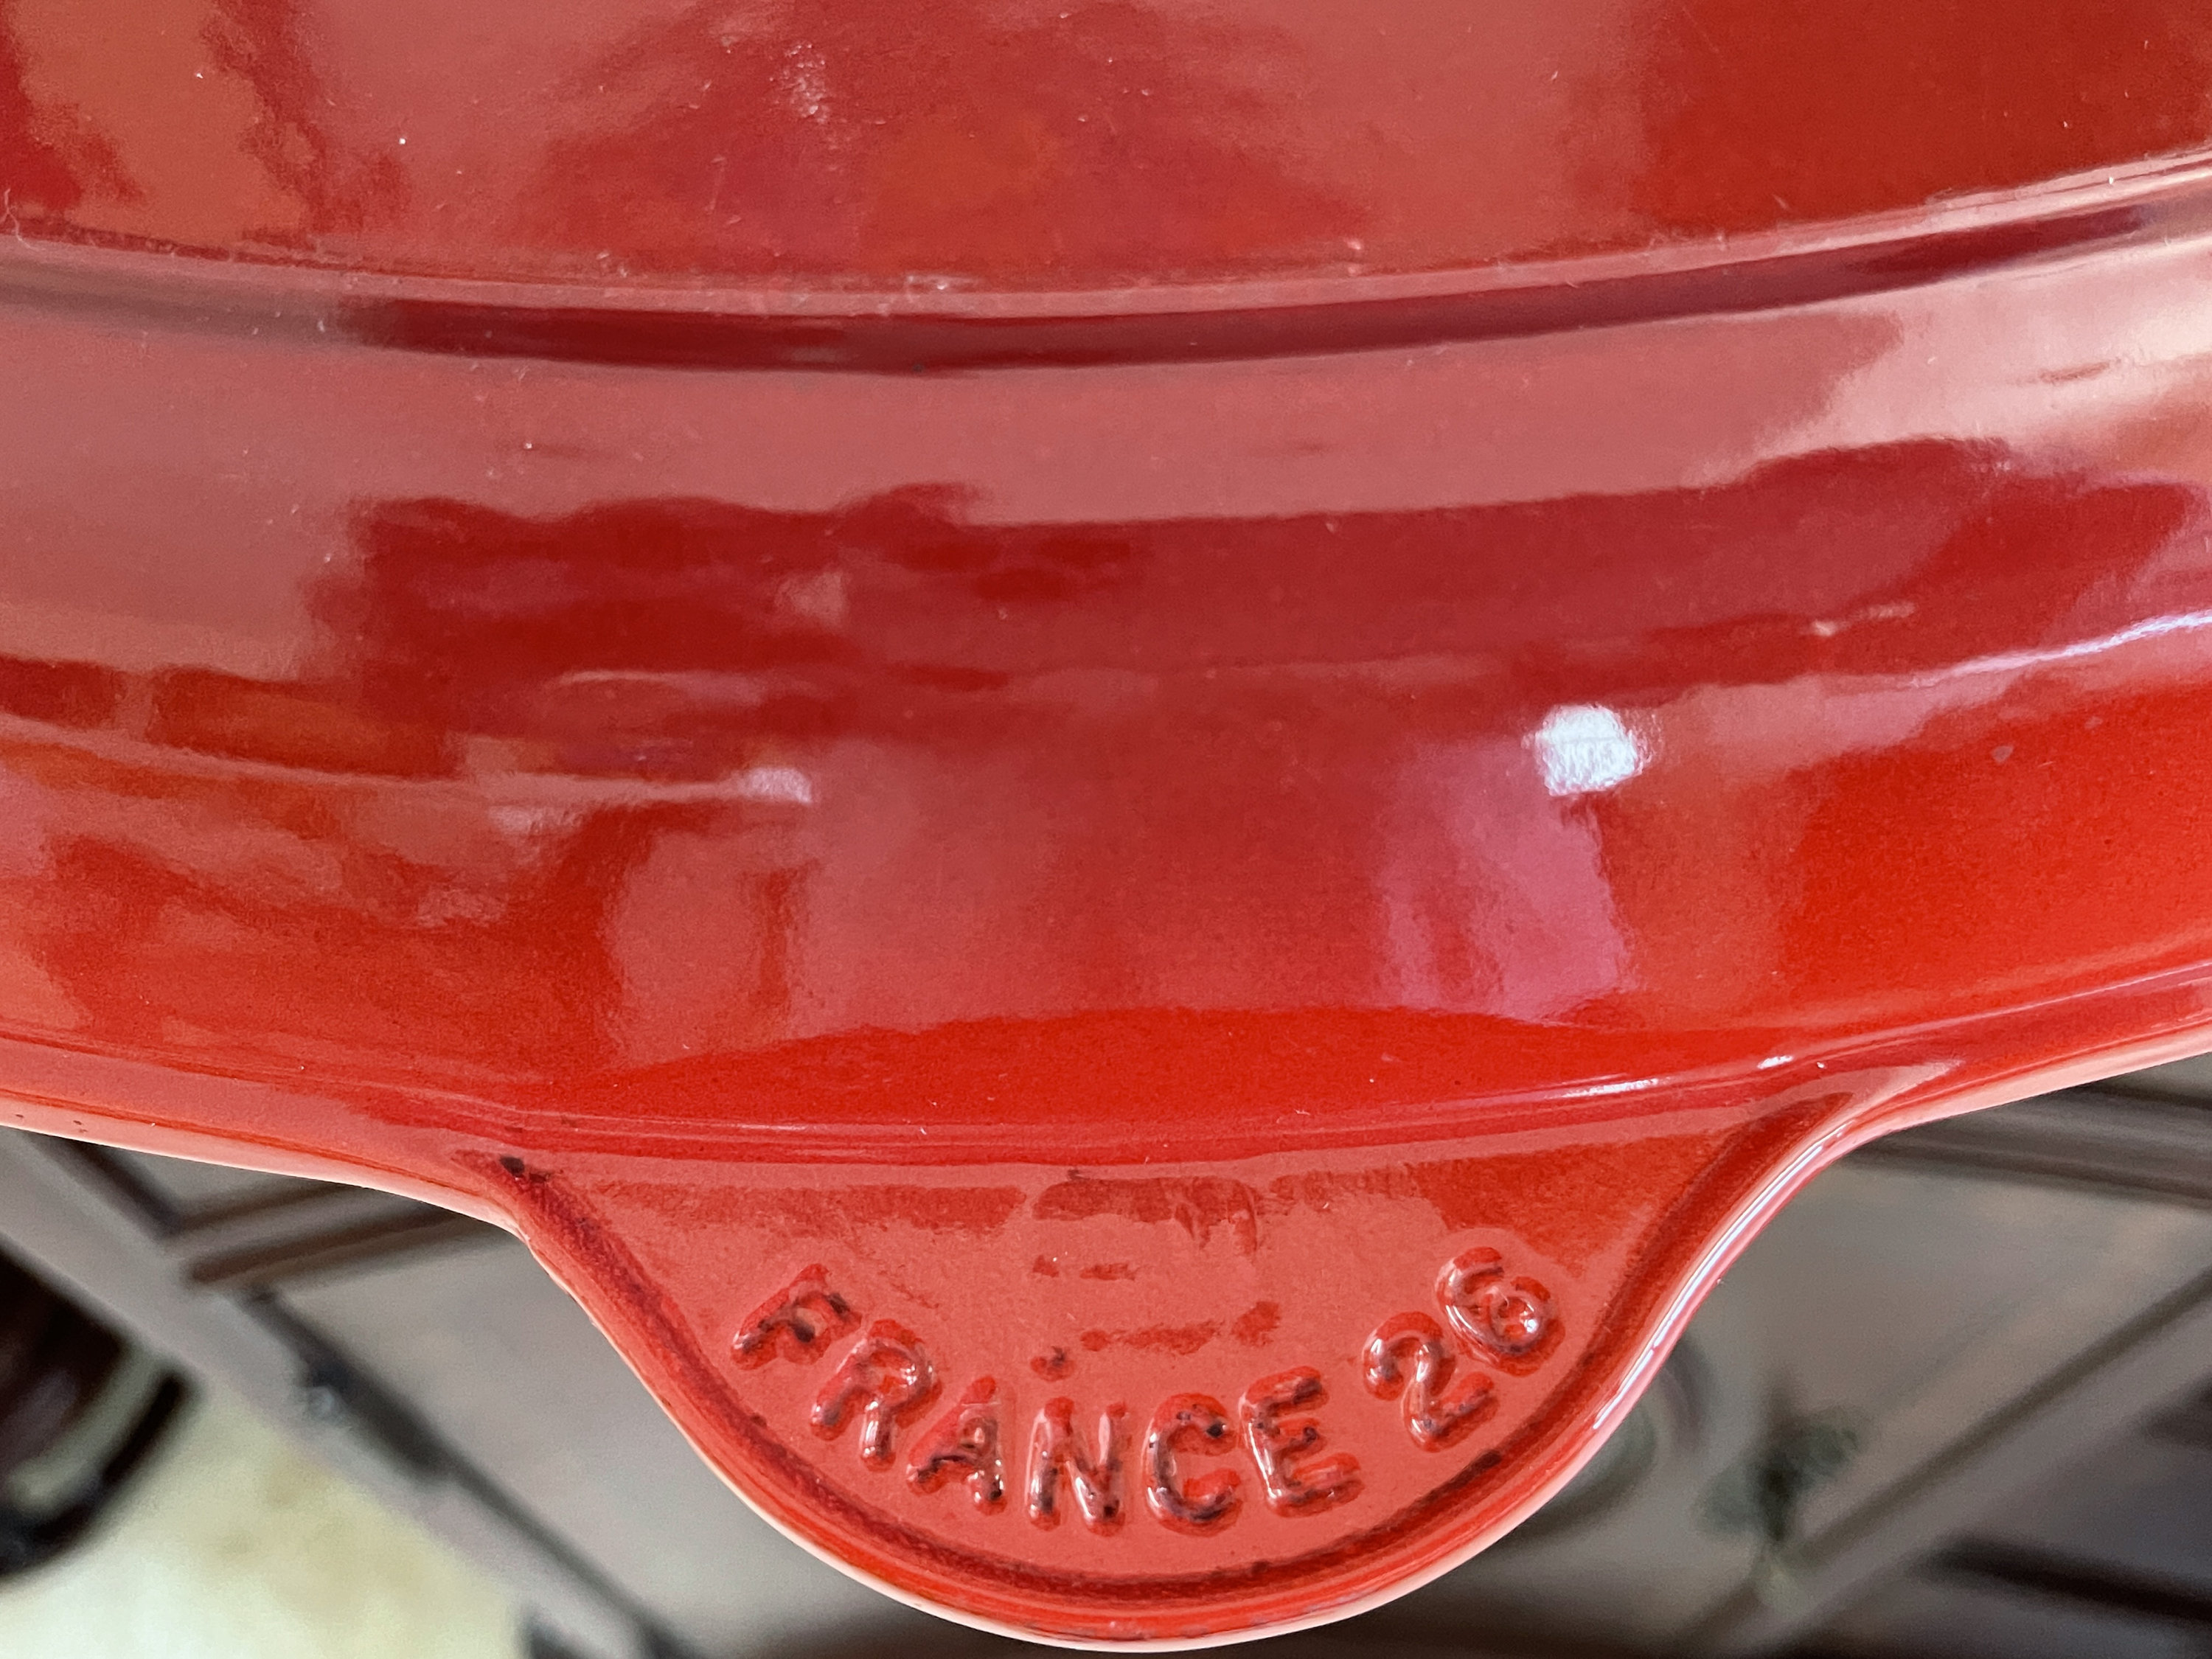 Le Creuset France #26 Red Cast Iron Grill Pan Skillet